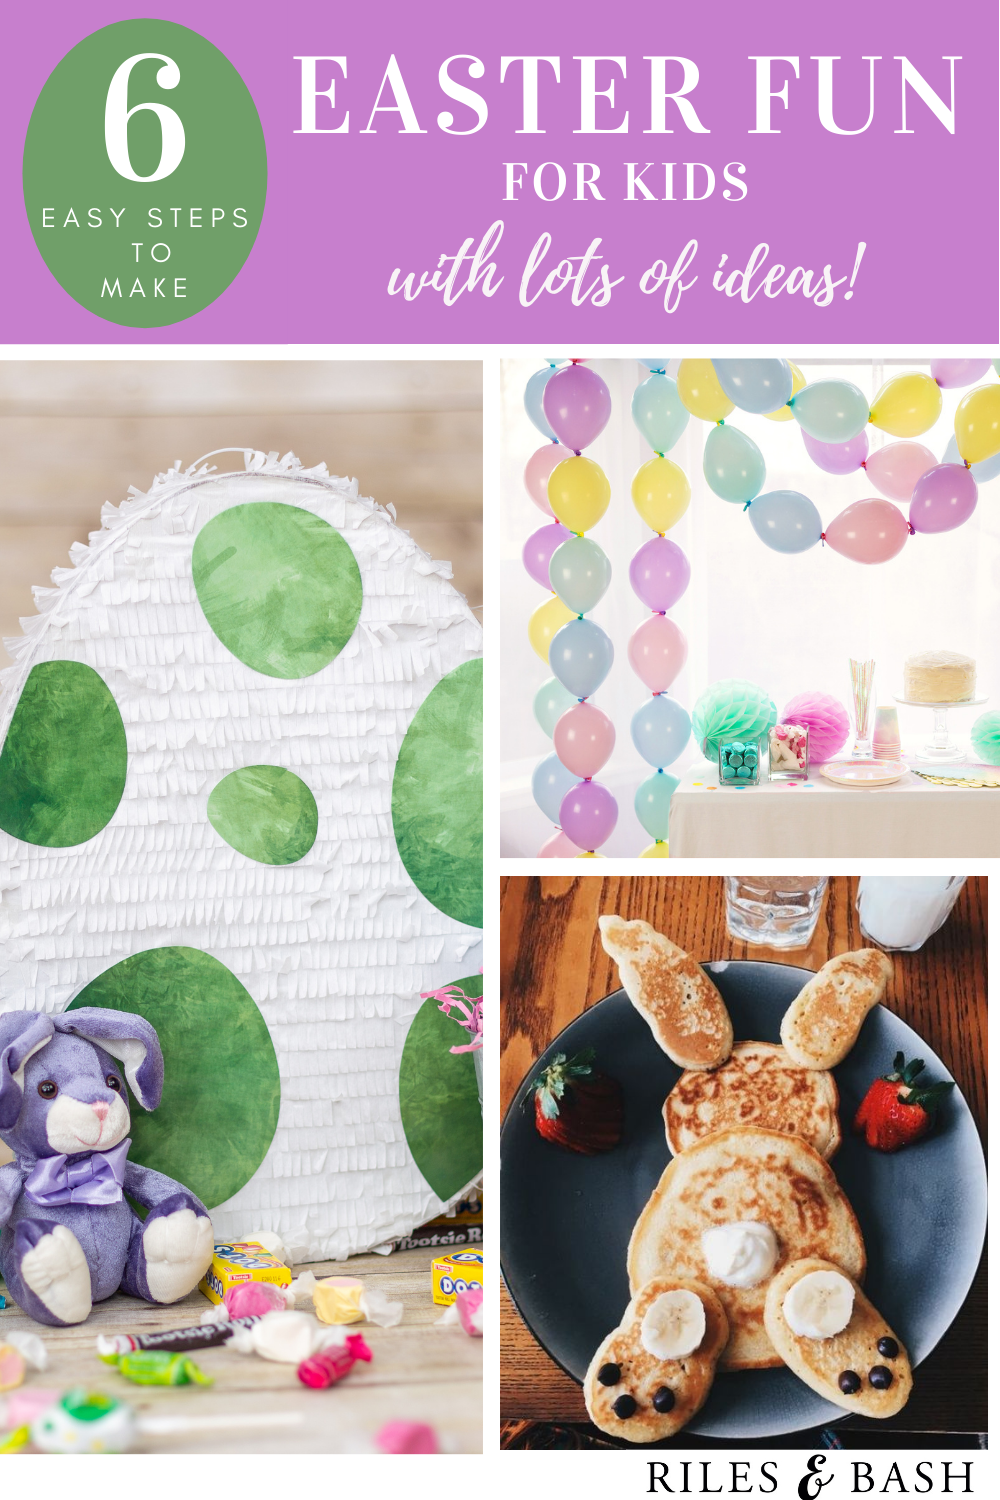 6 Ideas to Make Easter Extra Fun for Kids (with Lots of Ideas!)